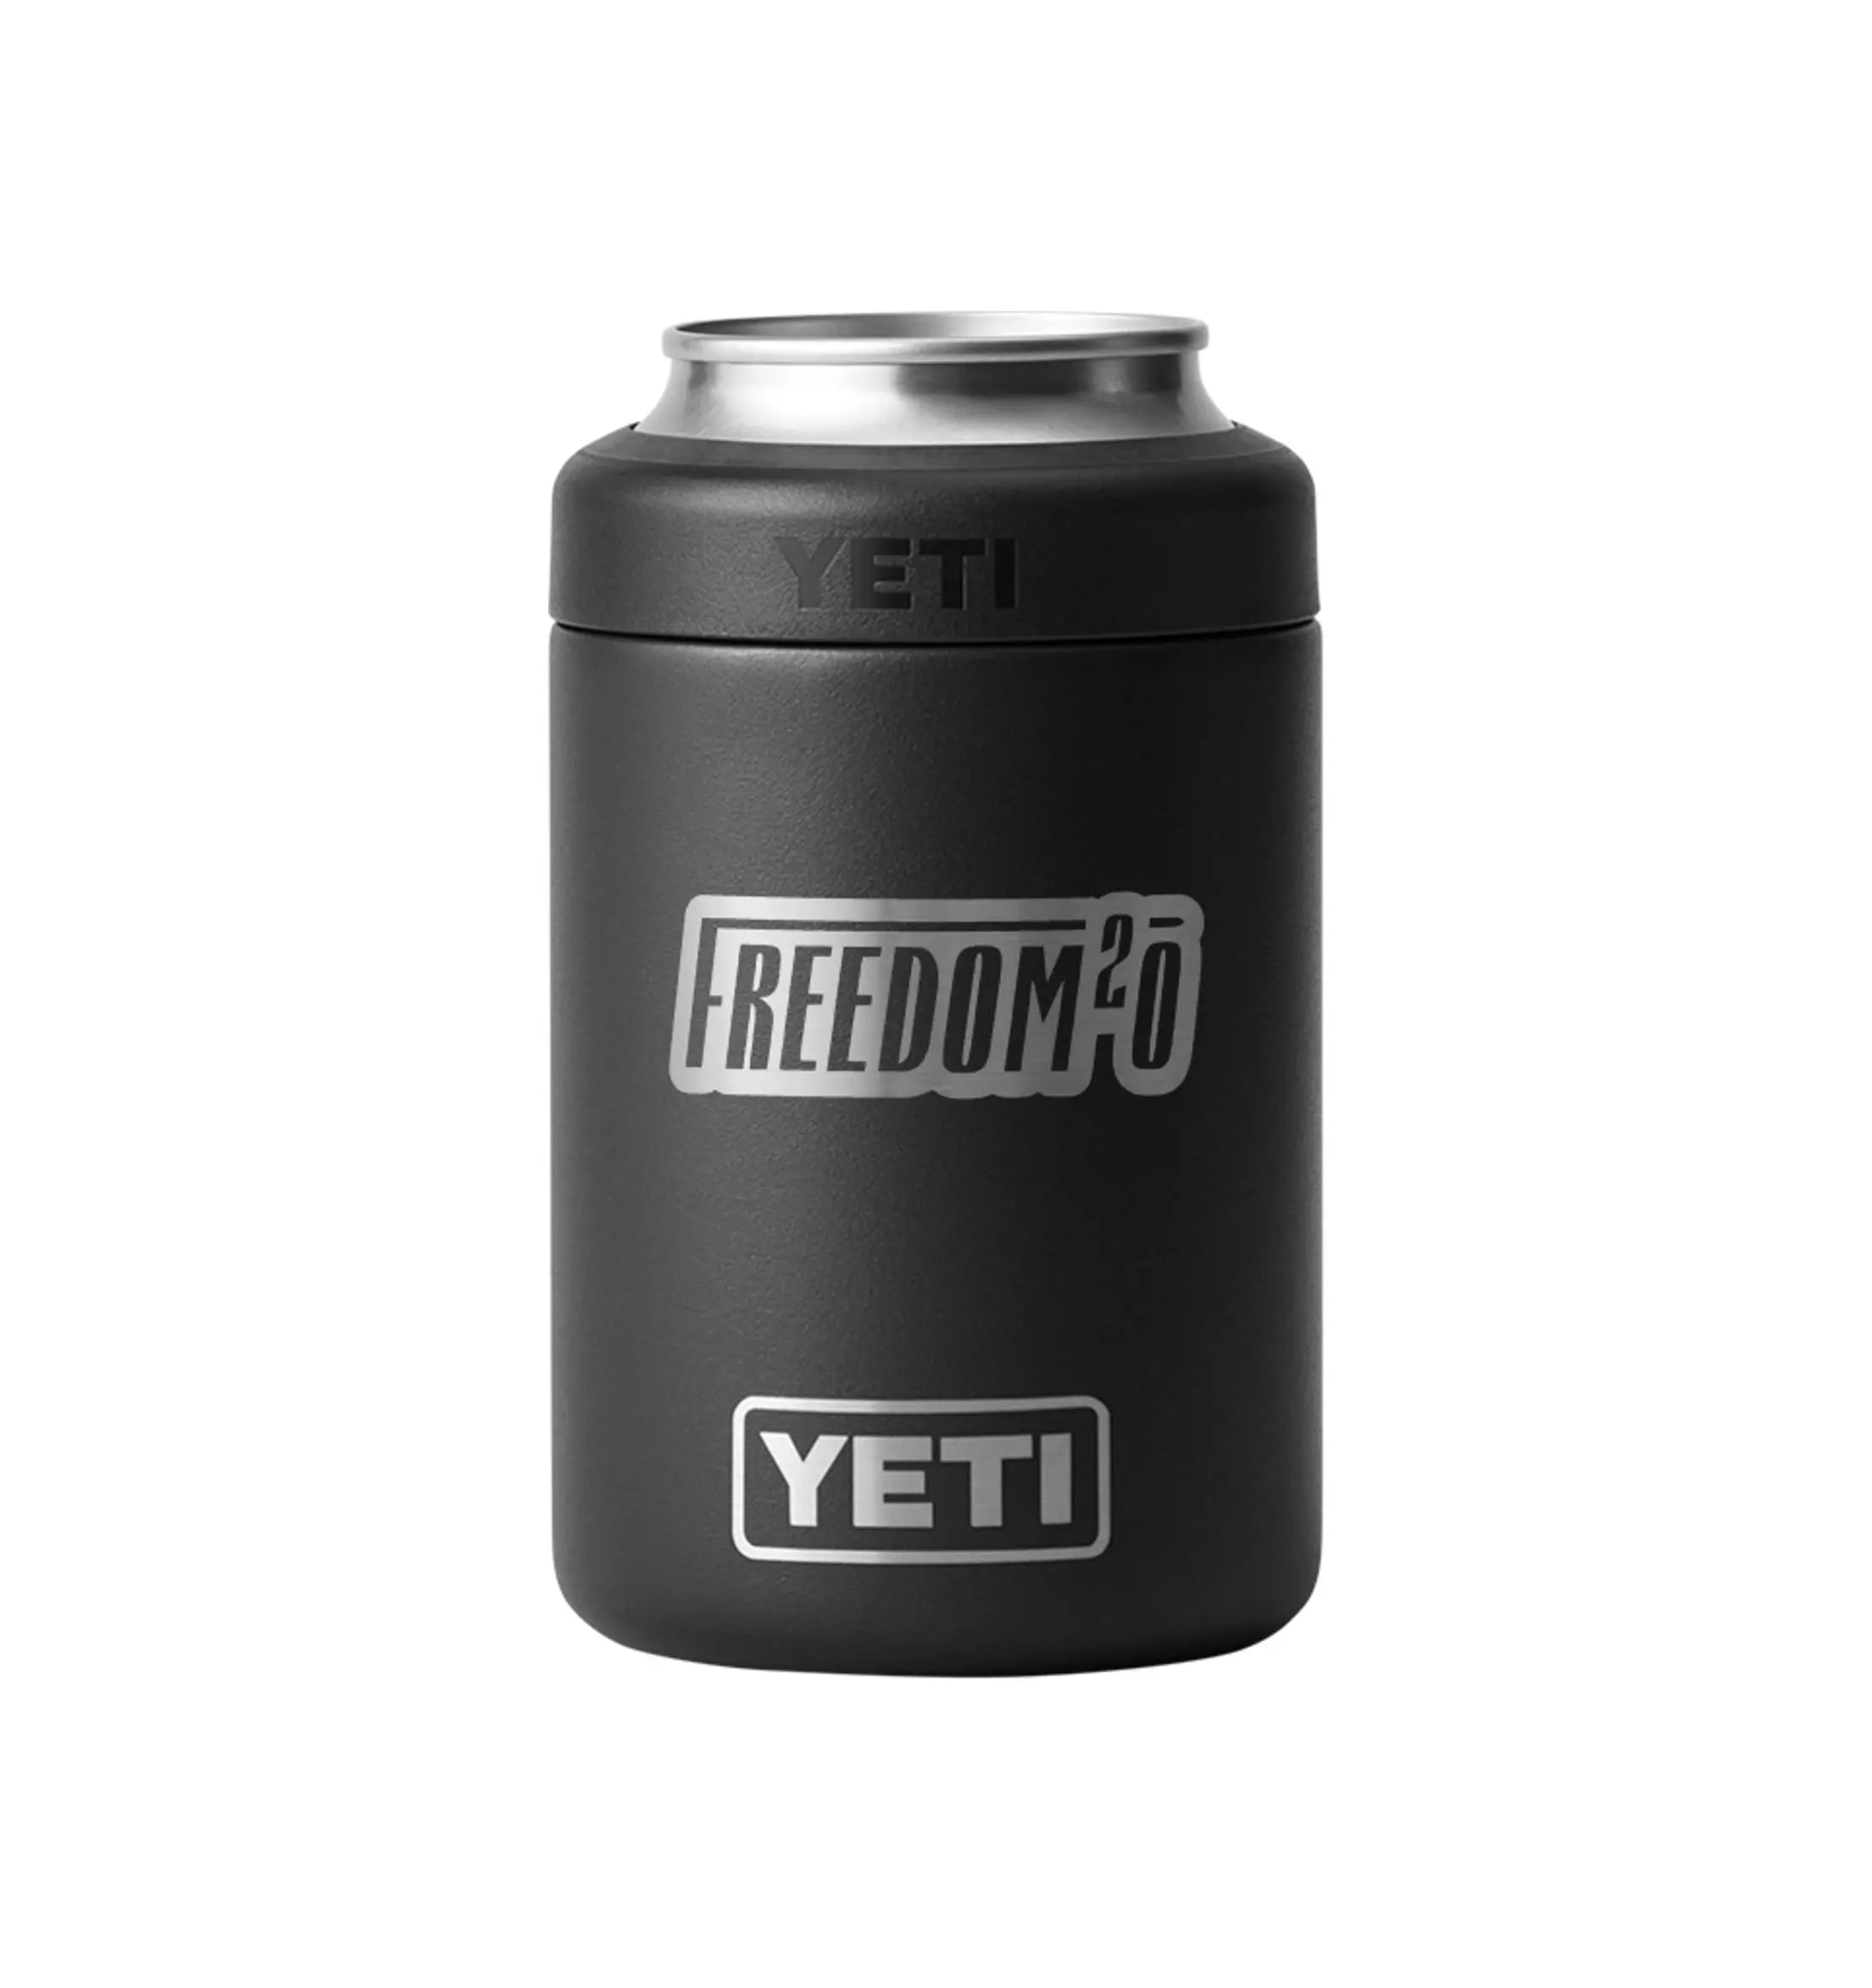 YETI "THIS DRINK AINT WOKE" Can Cooler Freedom2o